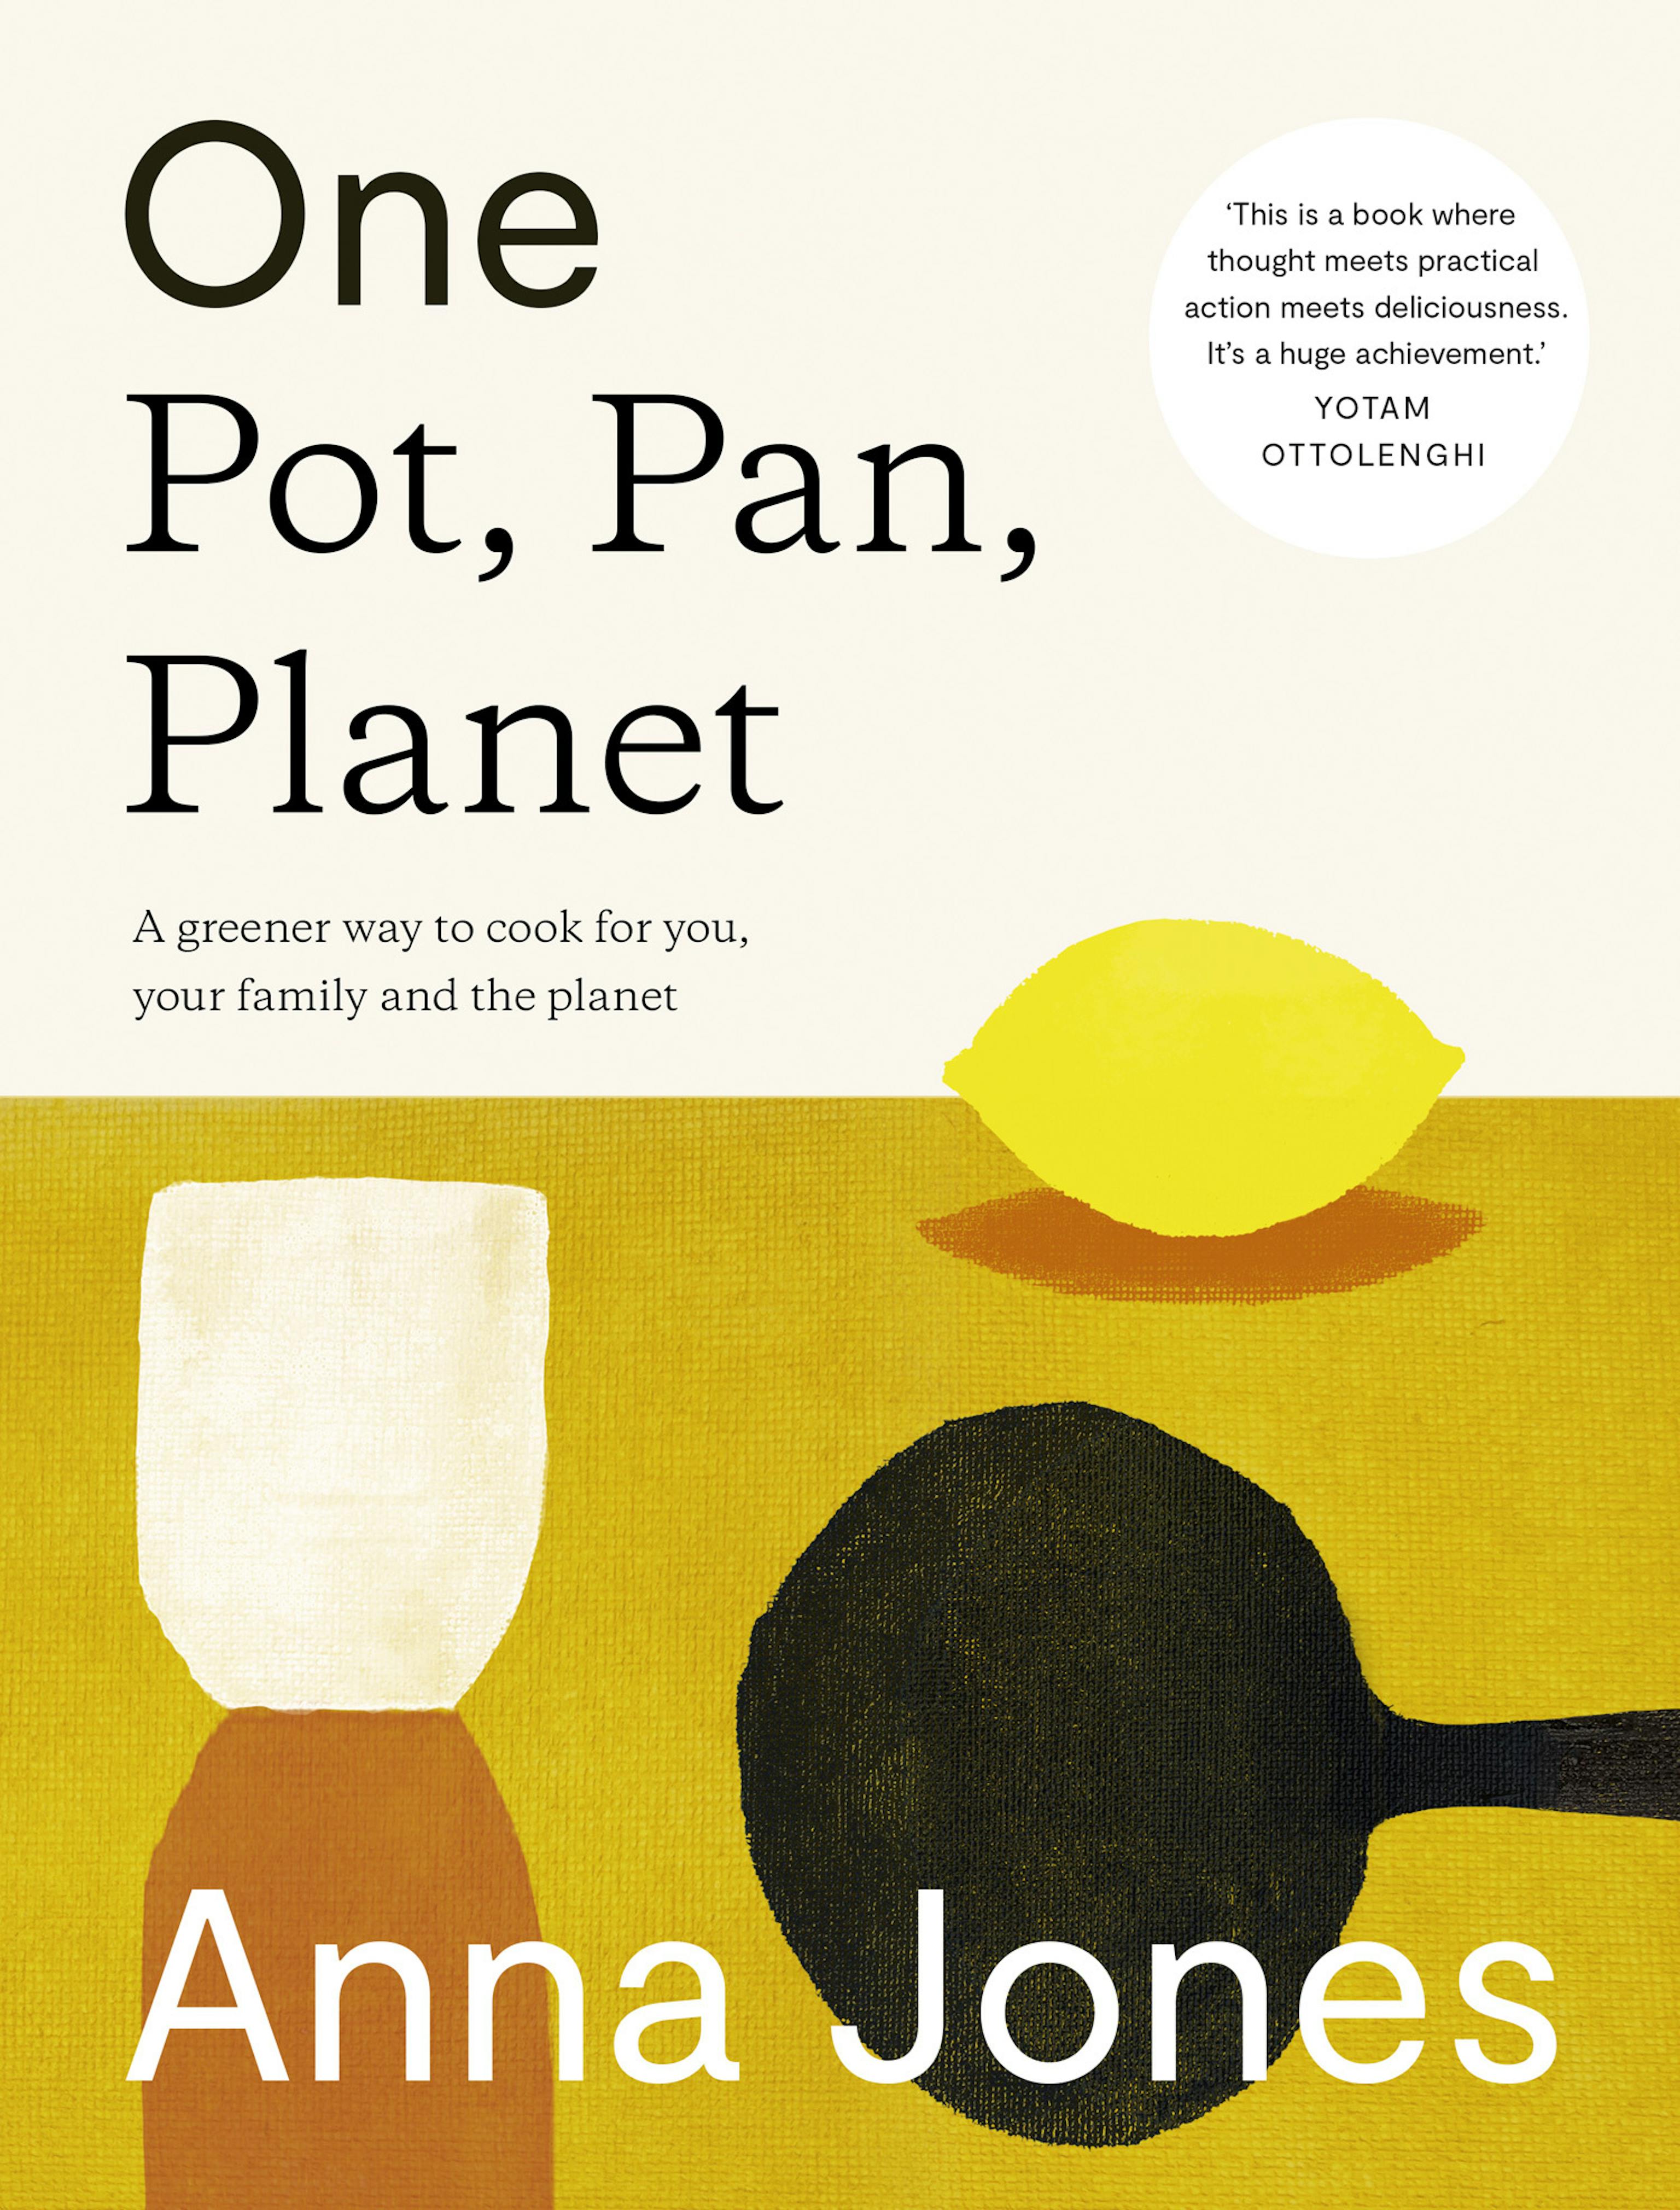 One pot pan planet book cover